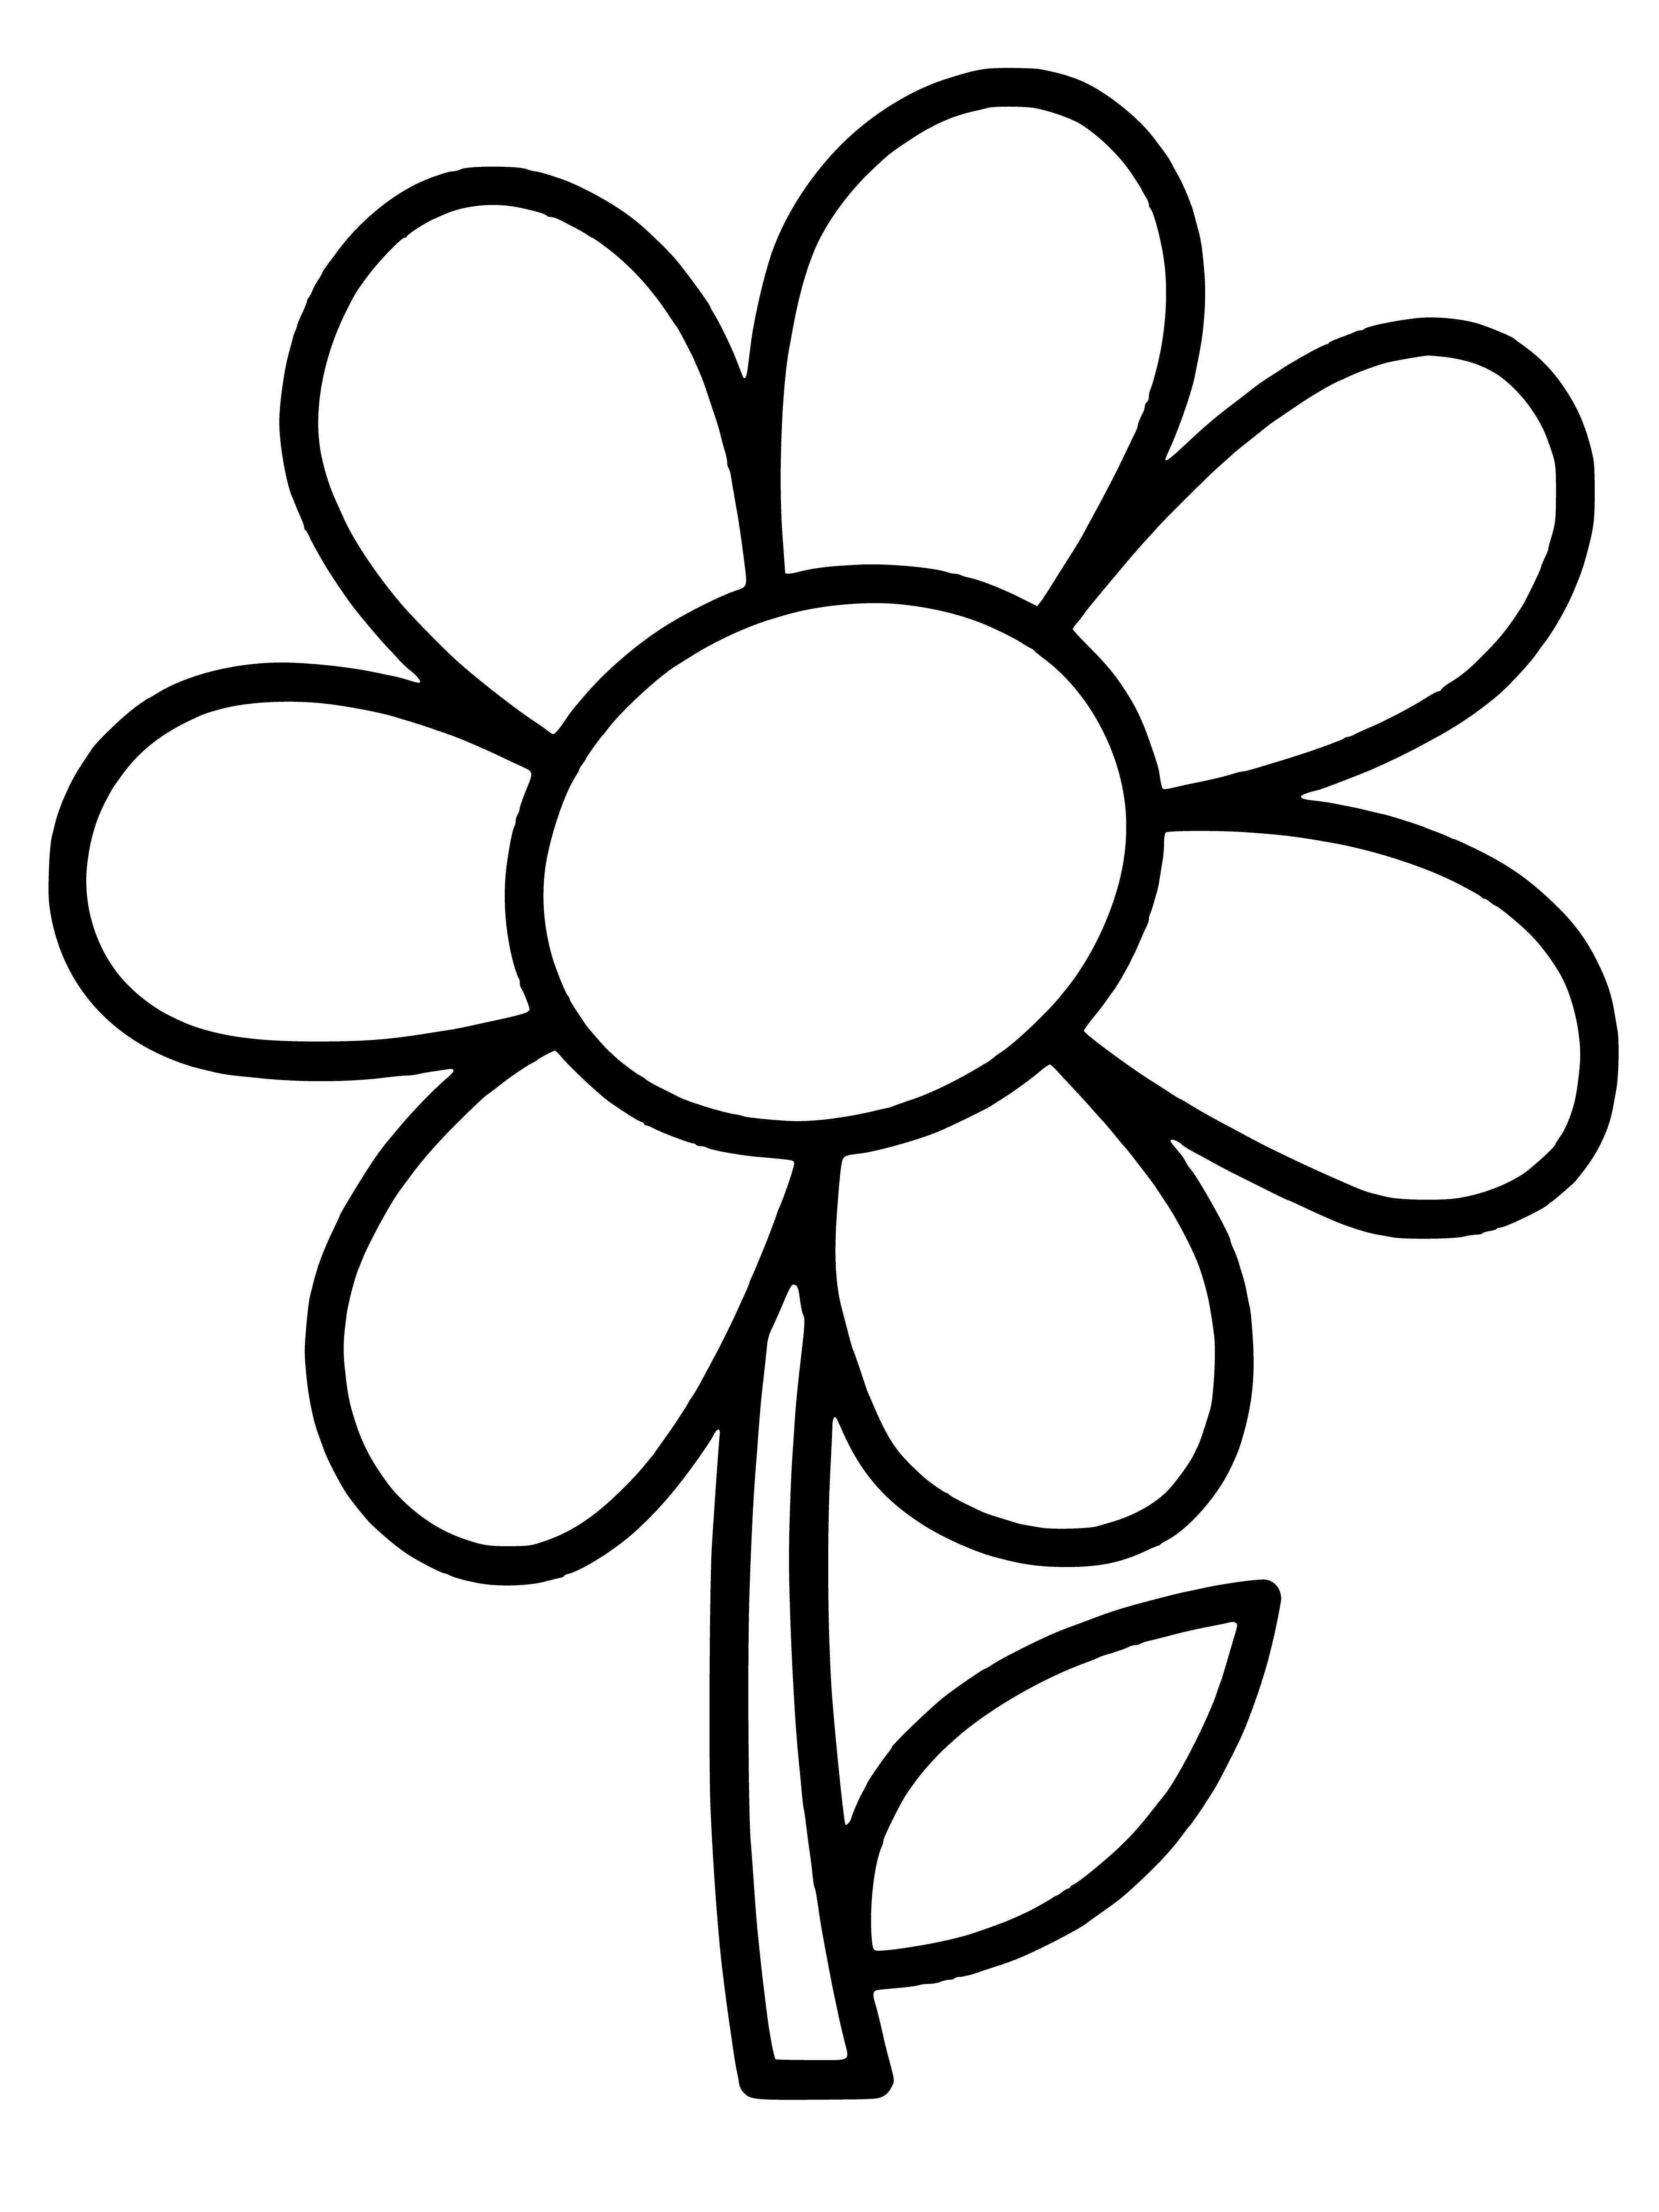 coloring page: Small delicate flower w/ yellow center, white petals, slender stem & feather-like leaves. Overall a fragile, elegant plant.